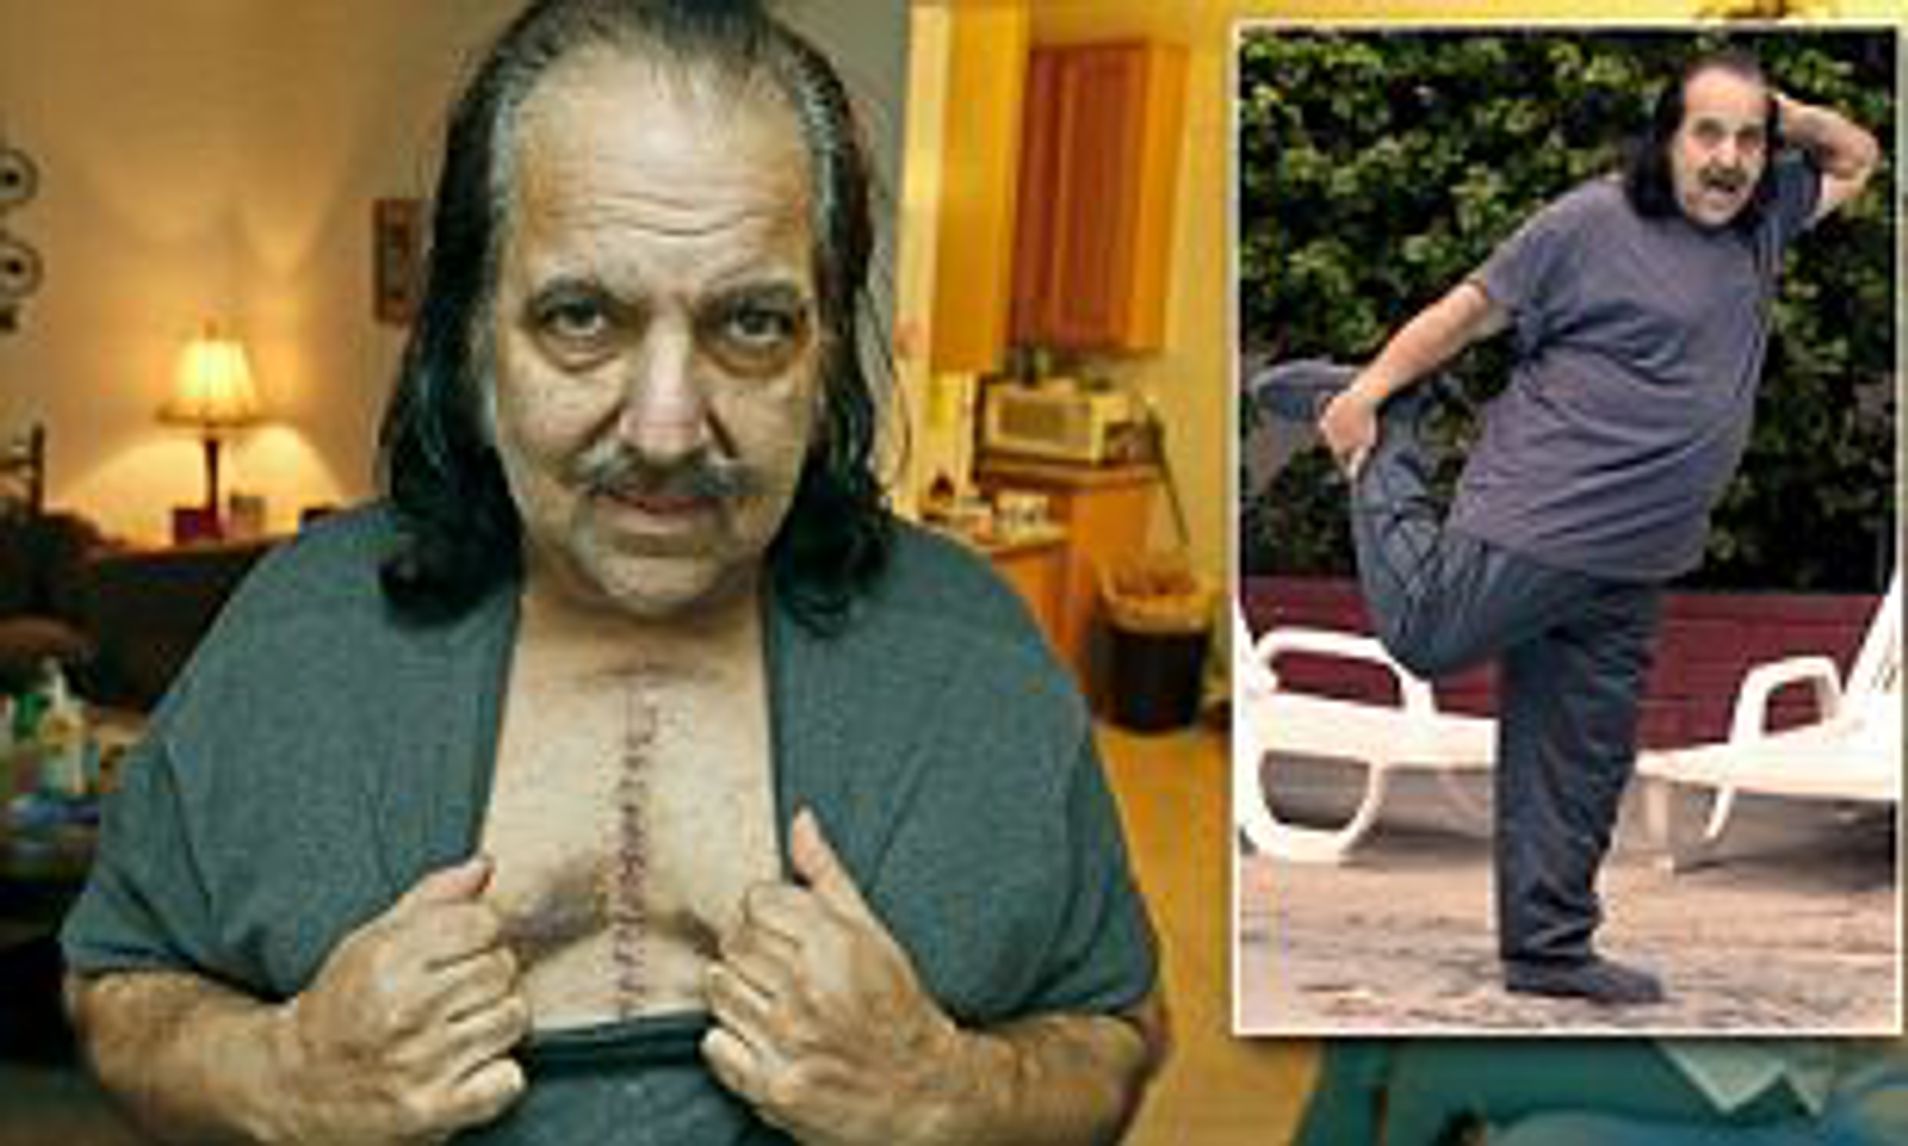 darlene garrison recommends Ron Jeremy When Young